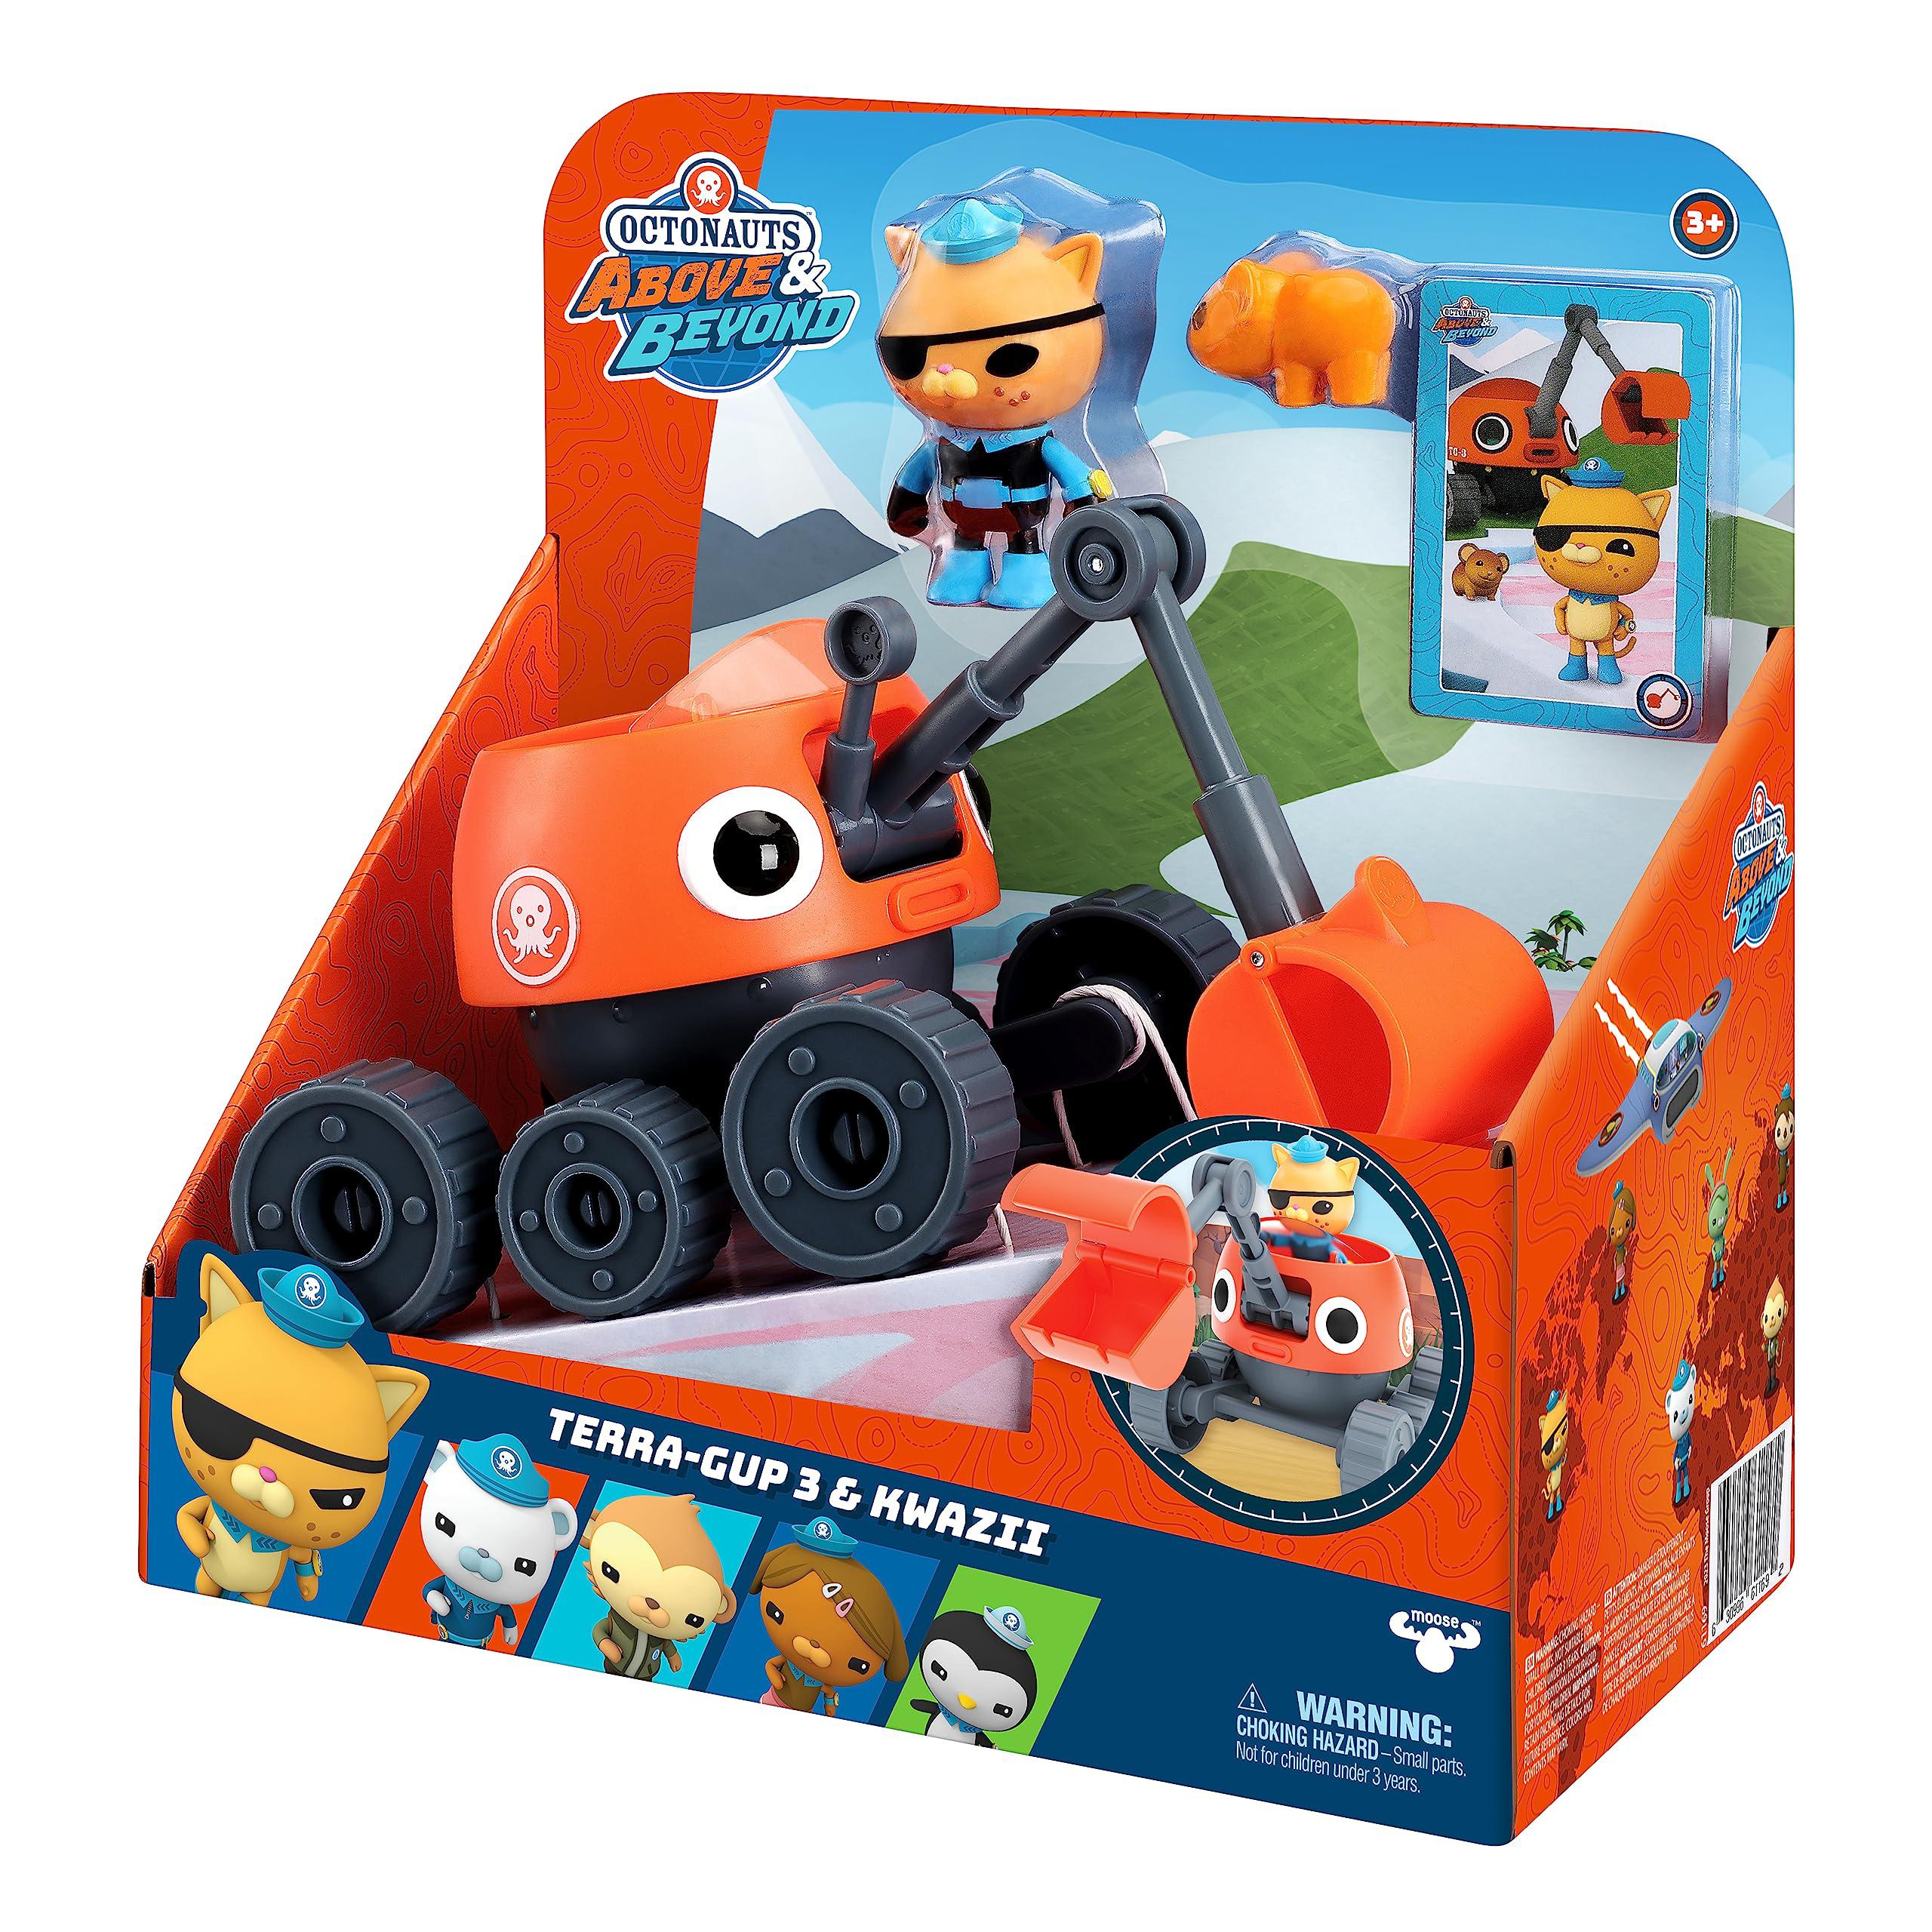 Disney Octonauts Above & Beyond Terra gup 3 and Kwazii Deluxe Toy Vehicle & Figure Set Recreate Missions Includes 28 Kwazii character F